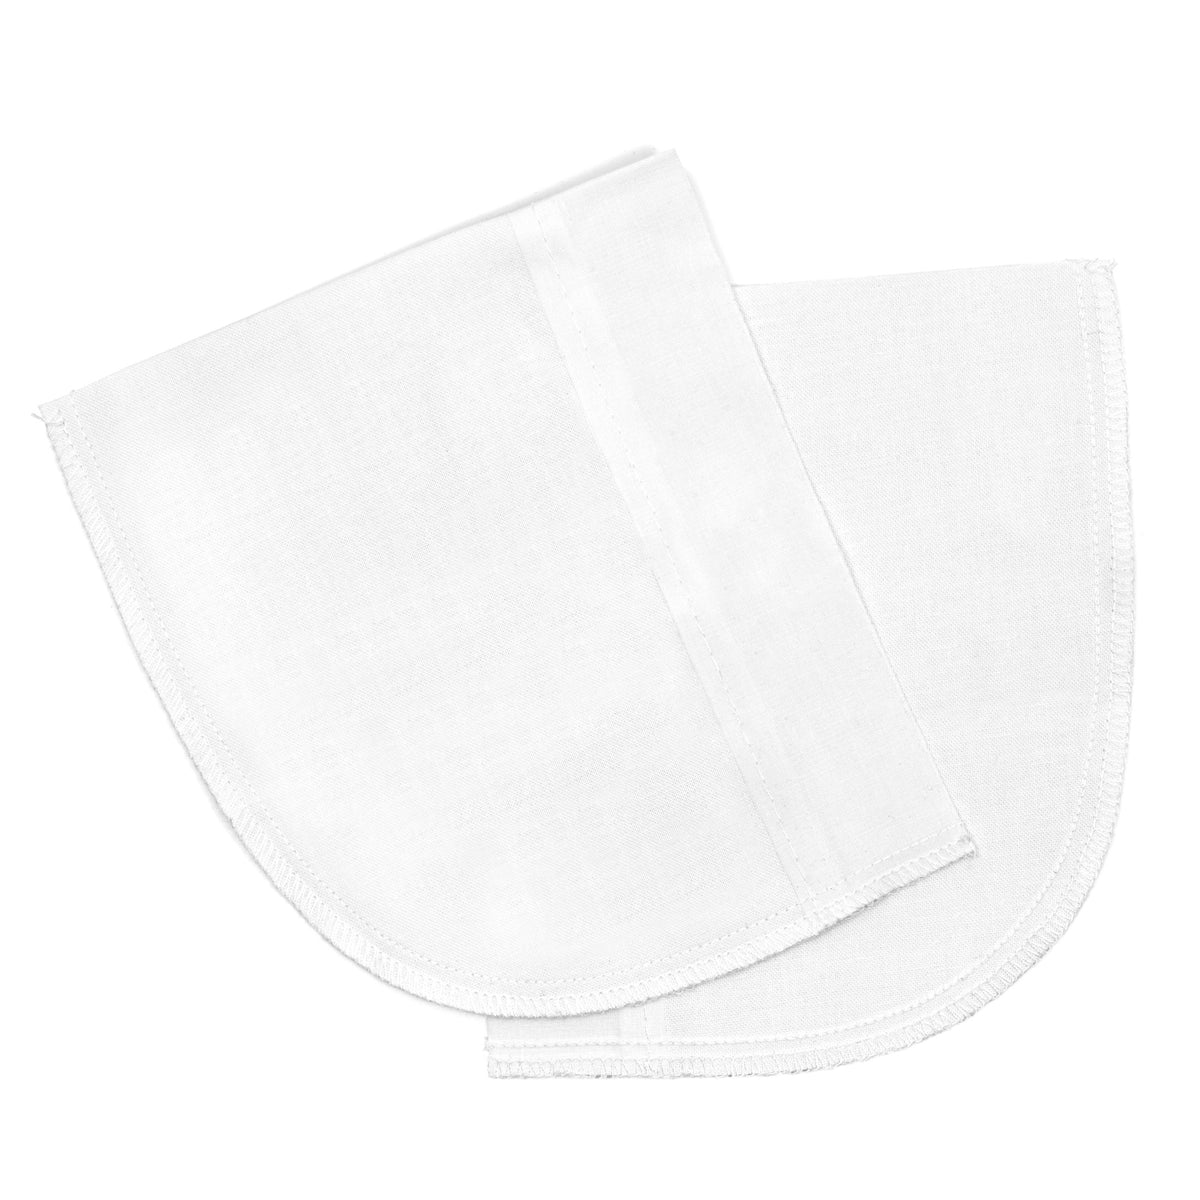  Iron On Pocket Repair Sew In Pocket Repair Trouser Pocket  Lining 100% Poly Cotton Patches (Iron On)